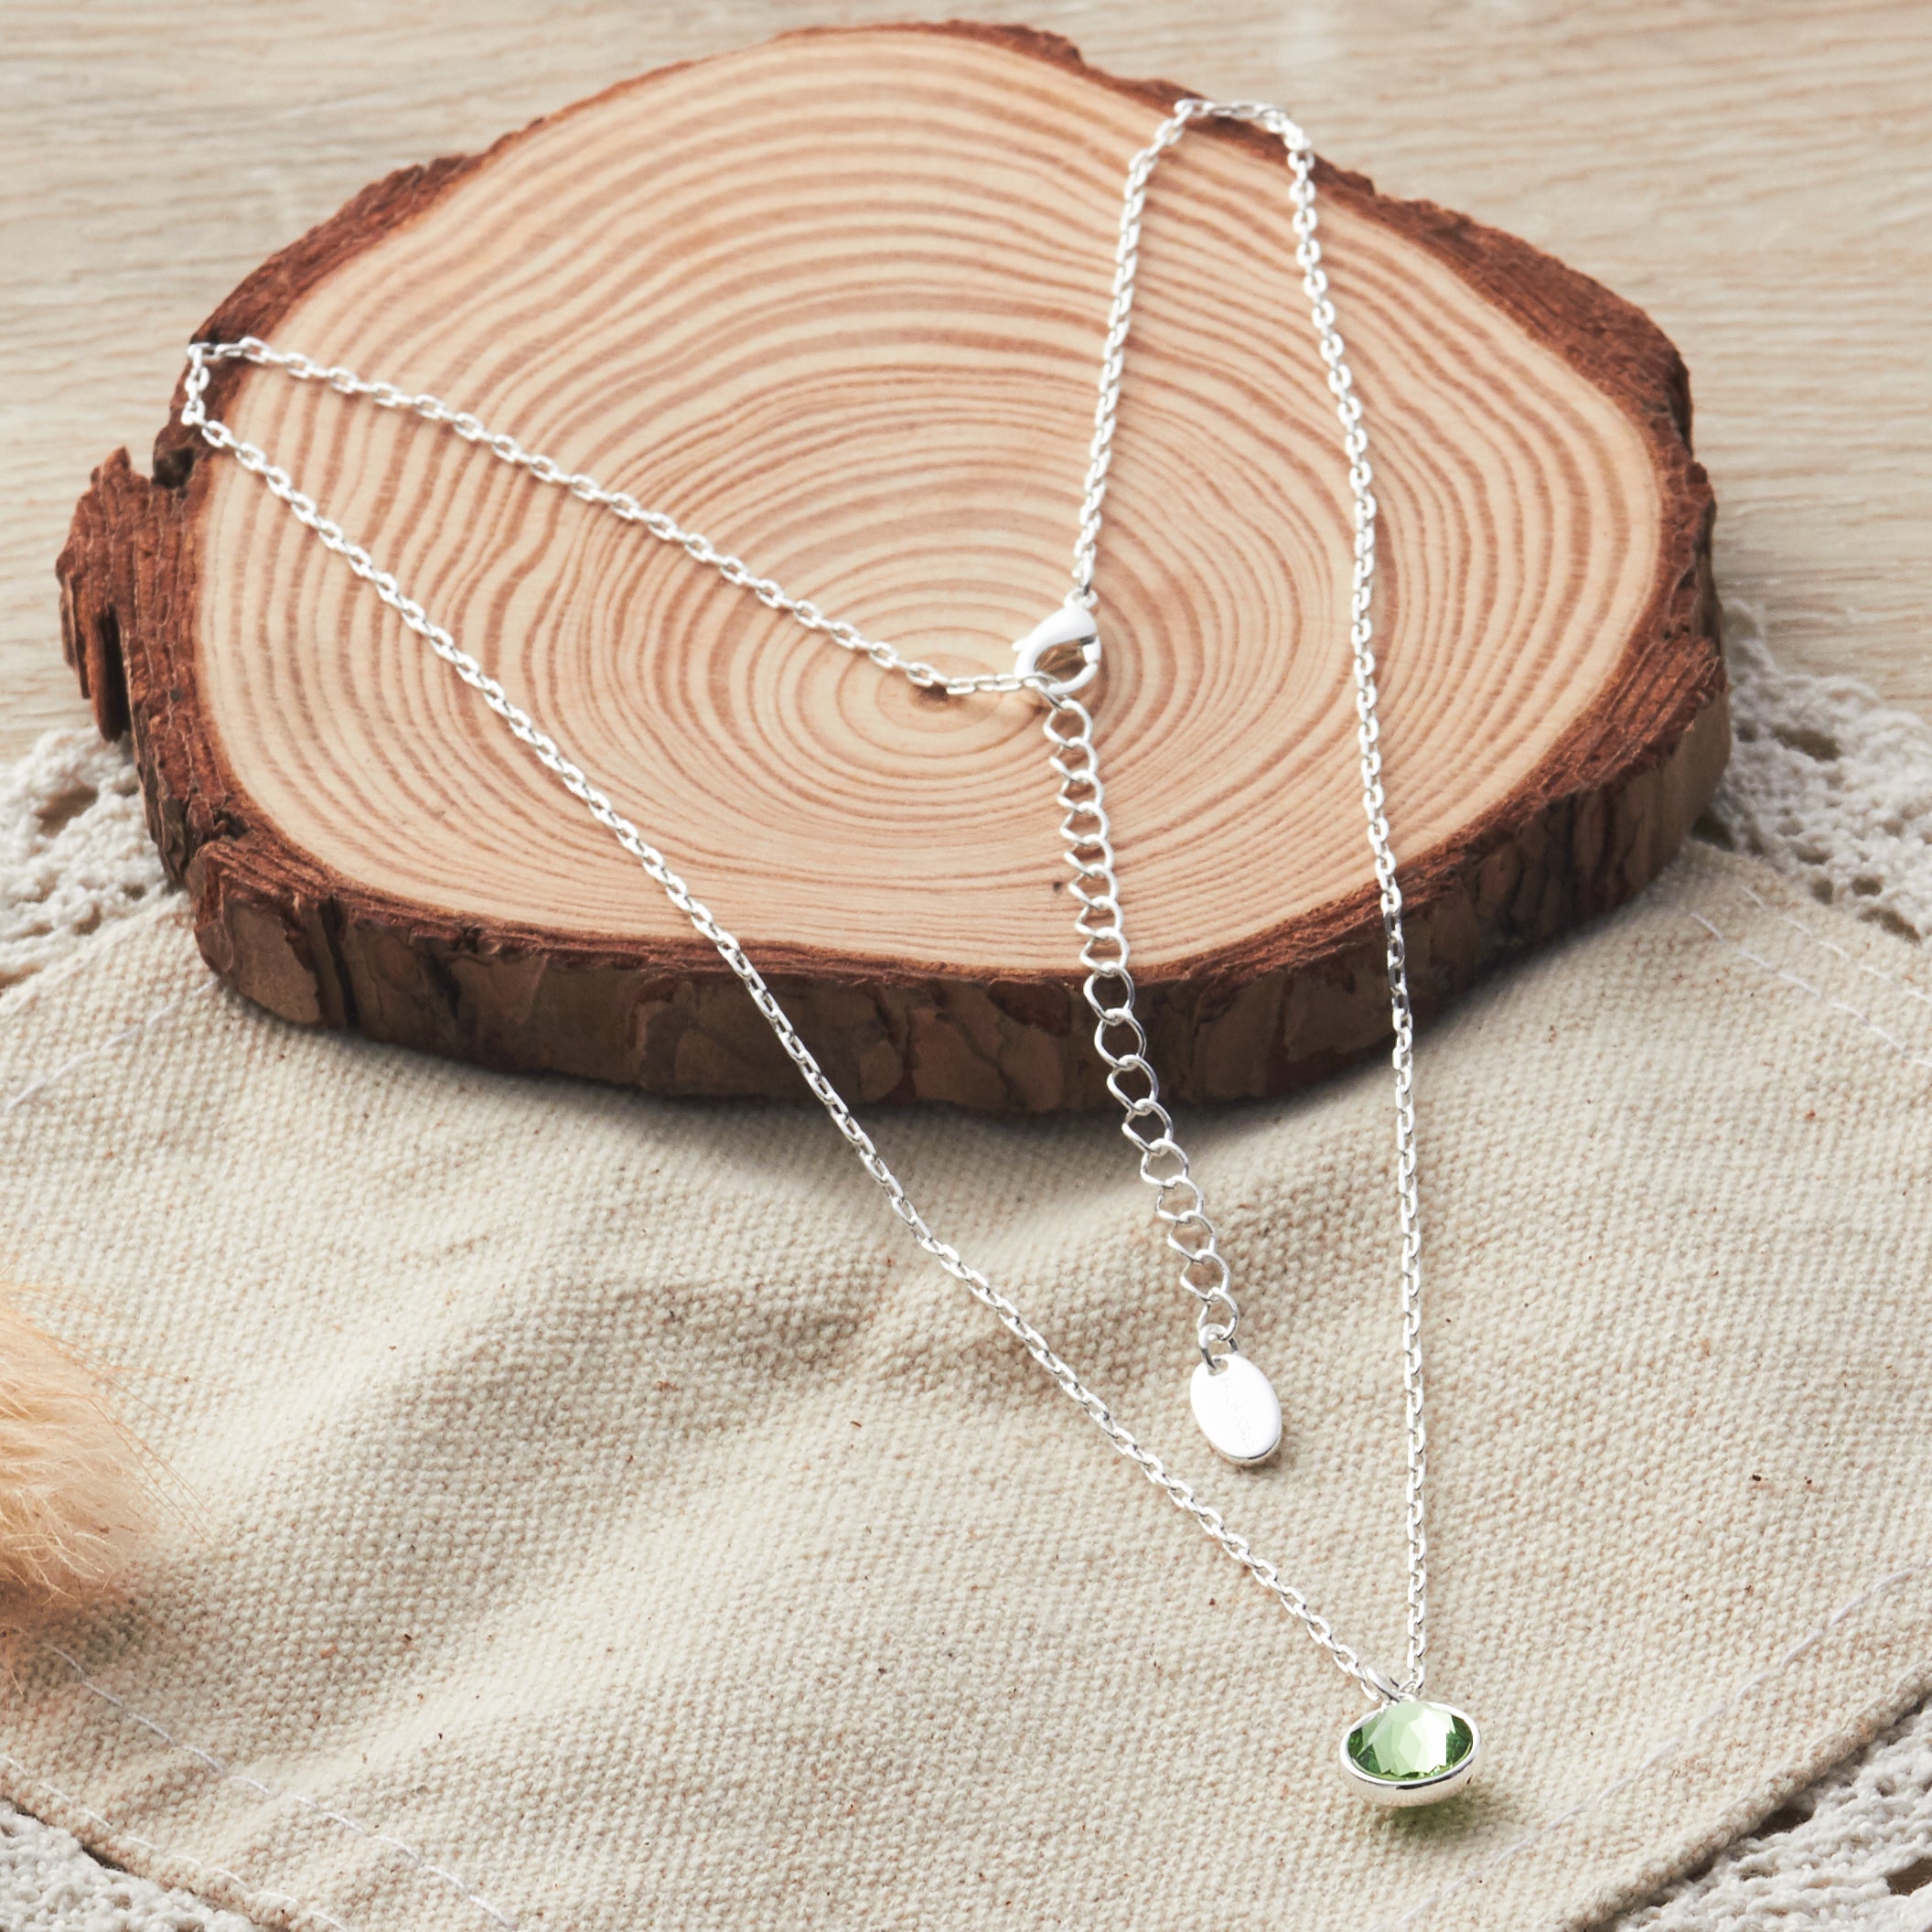 Light Green Crystal Necklace Created with Zircondia® Crystals